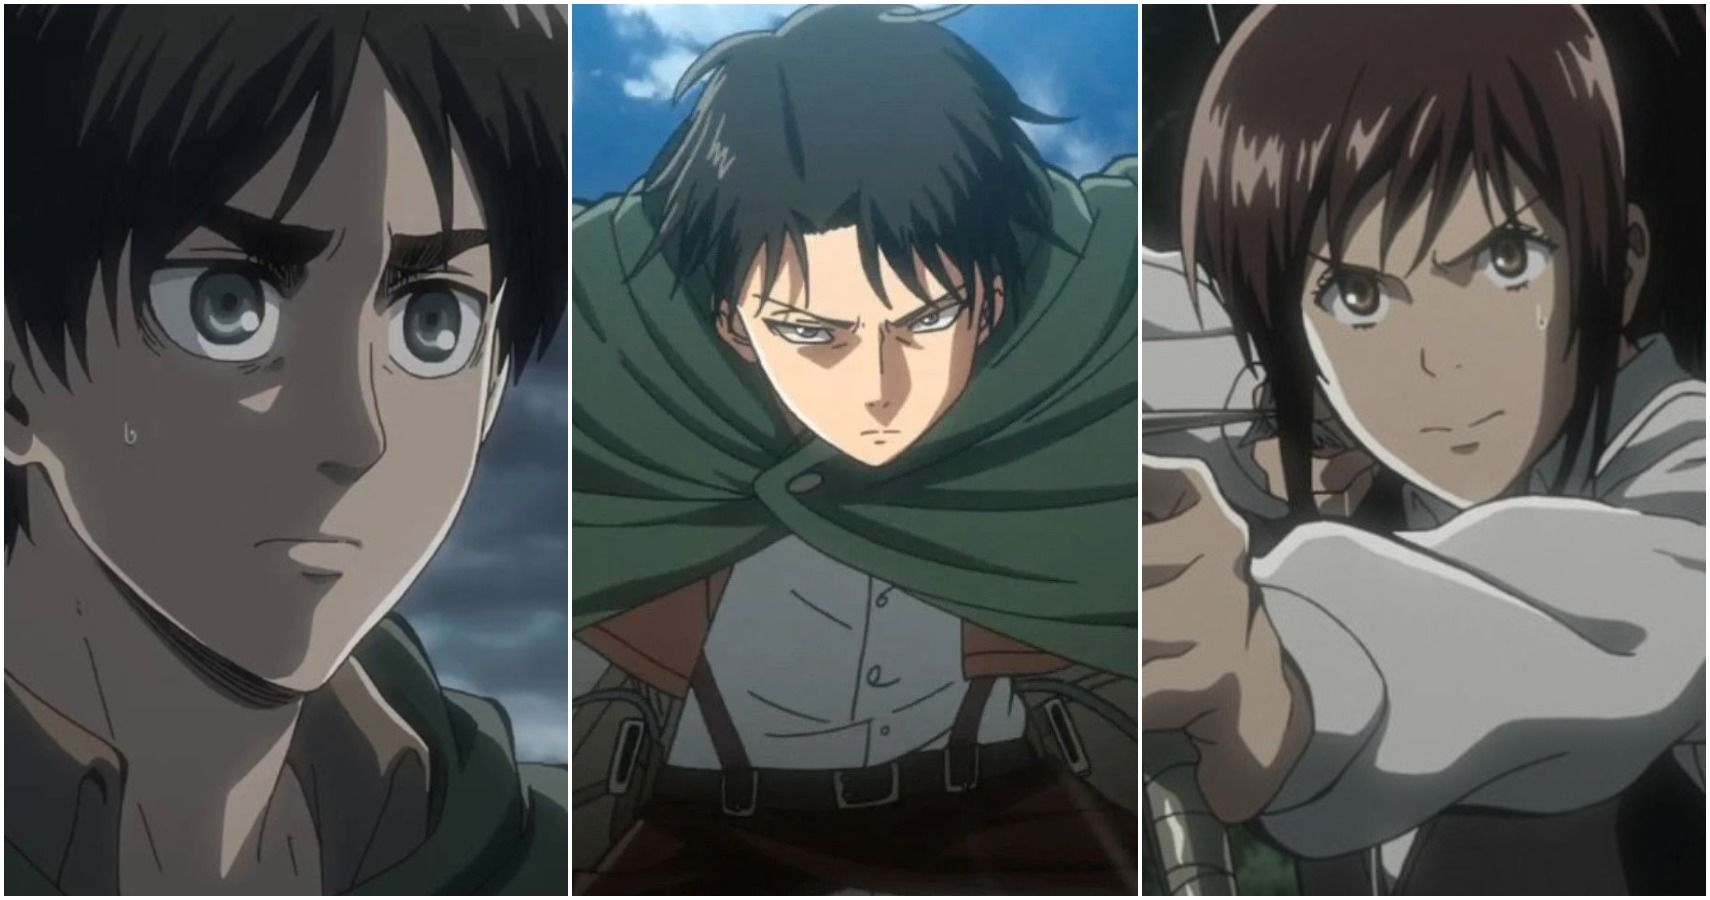 Attack On Titan Which Character Are You Based On Your Zodiac 48+ matching anime pfp aot pics 4k desktop. attack on titan which character are